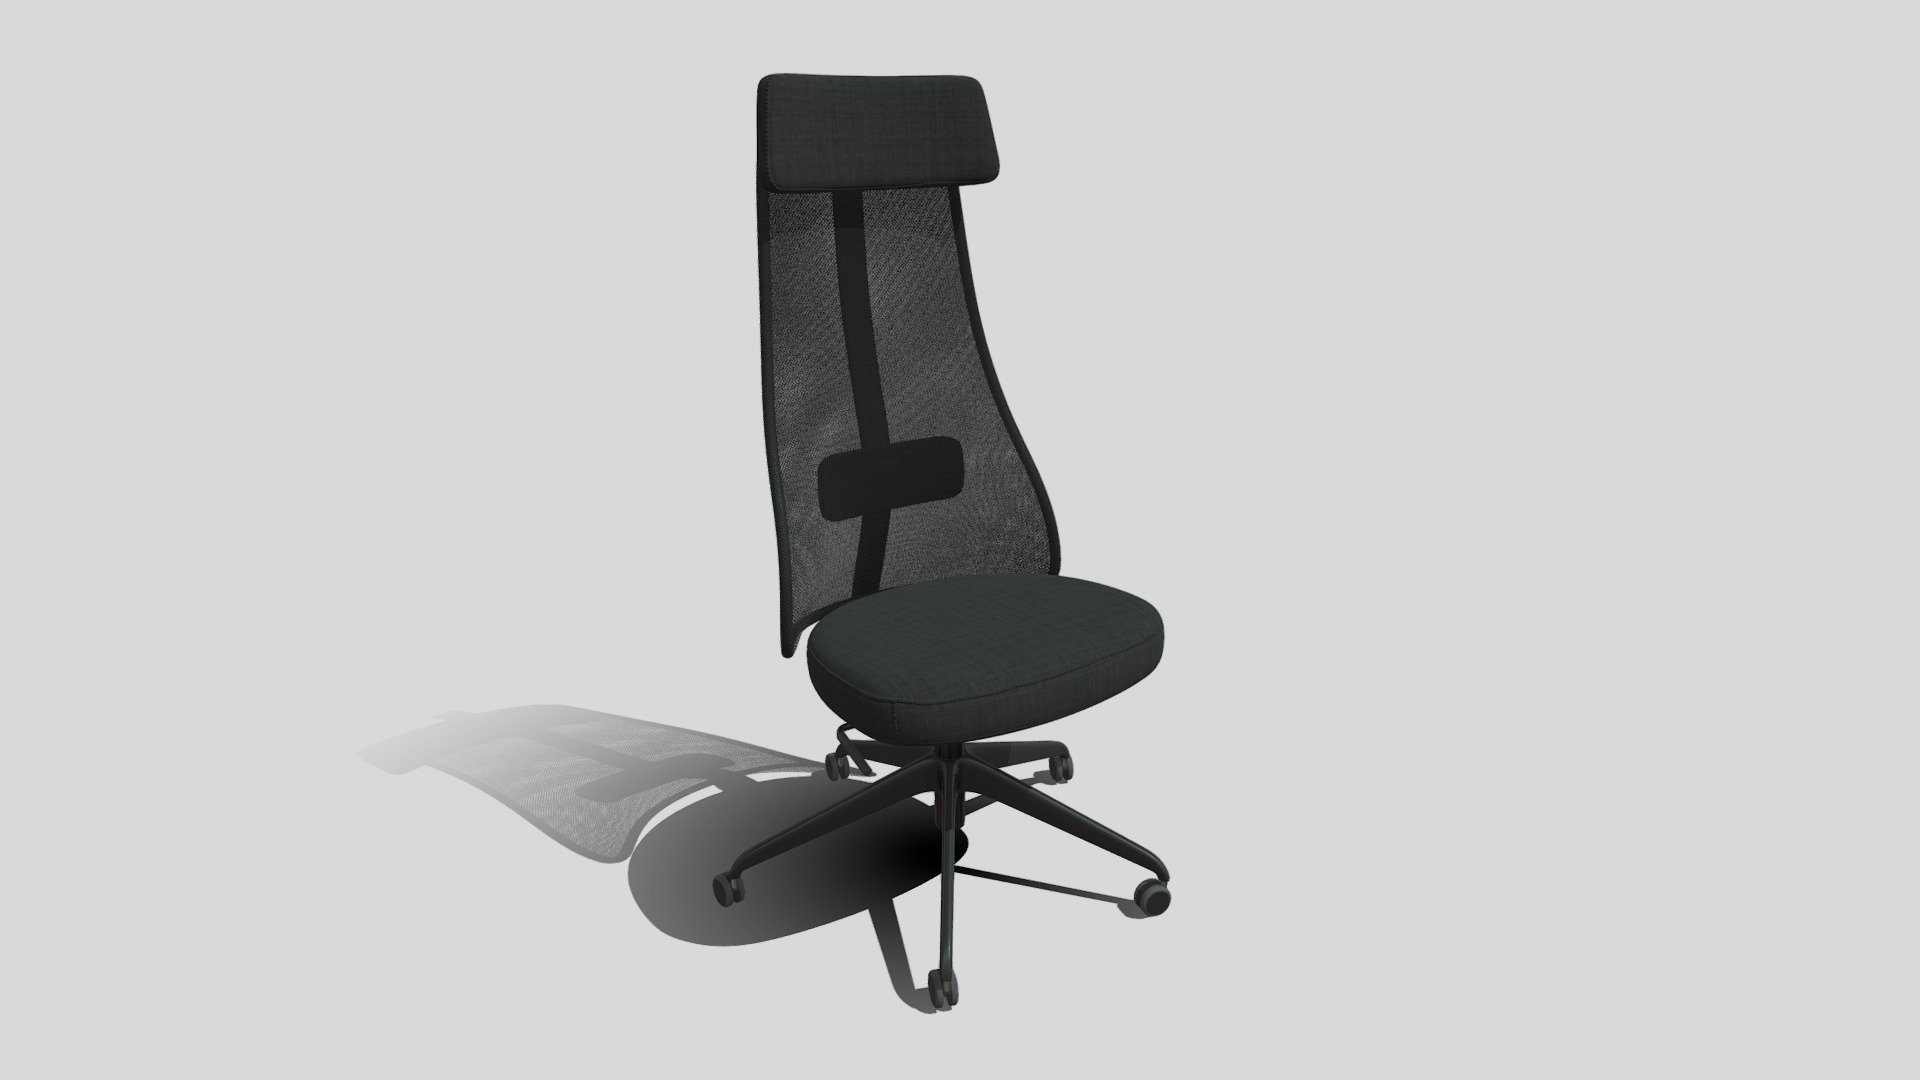 A fairly accurate representation of an office chair from everyones favourite flat-pack furniture company.

Modeled to real world scale for use in arch-viz 3d model